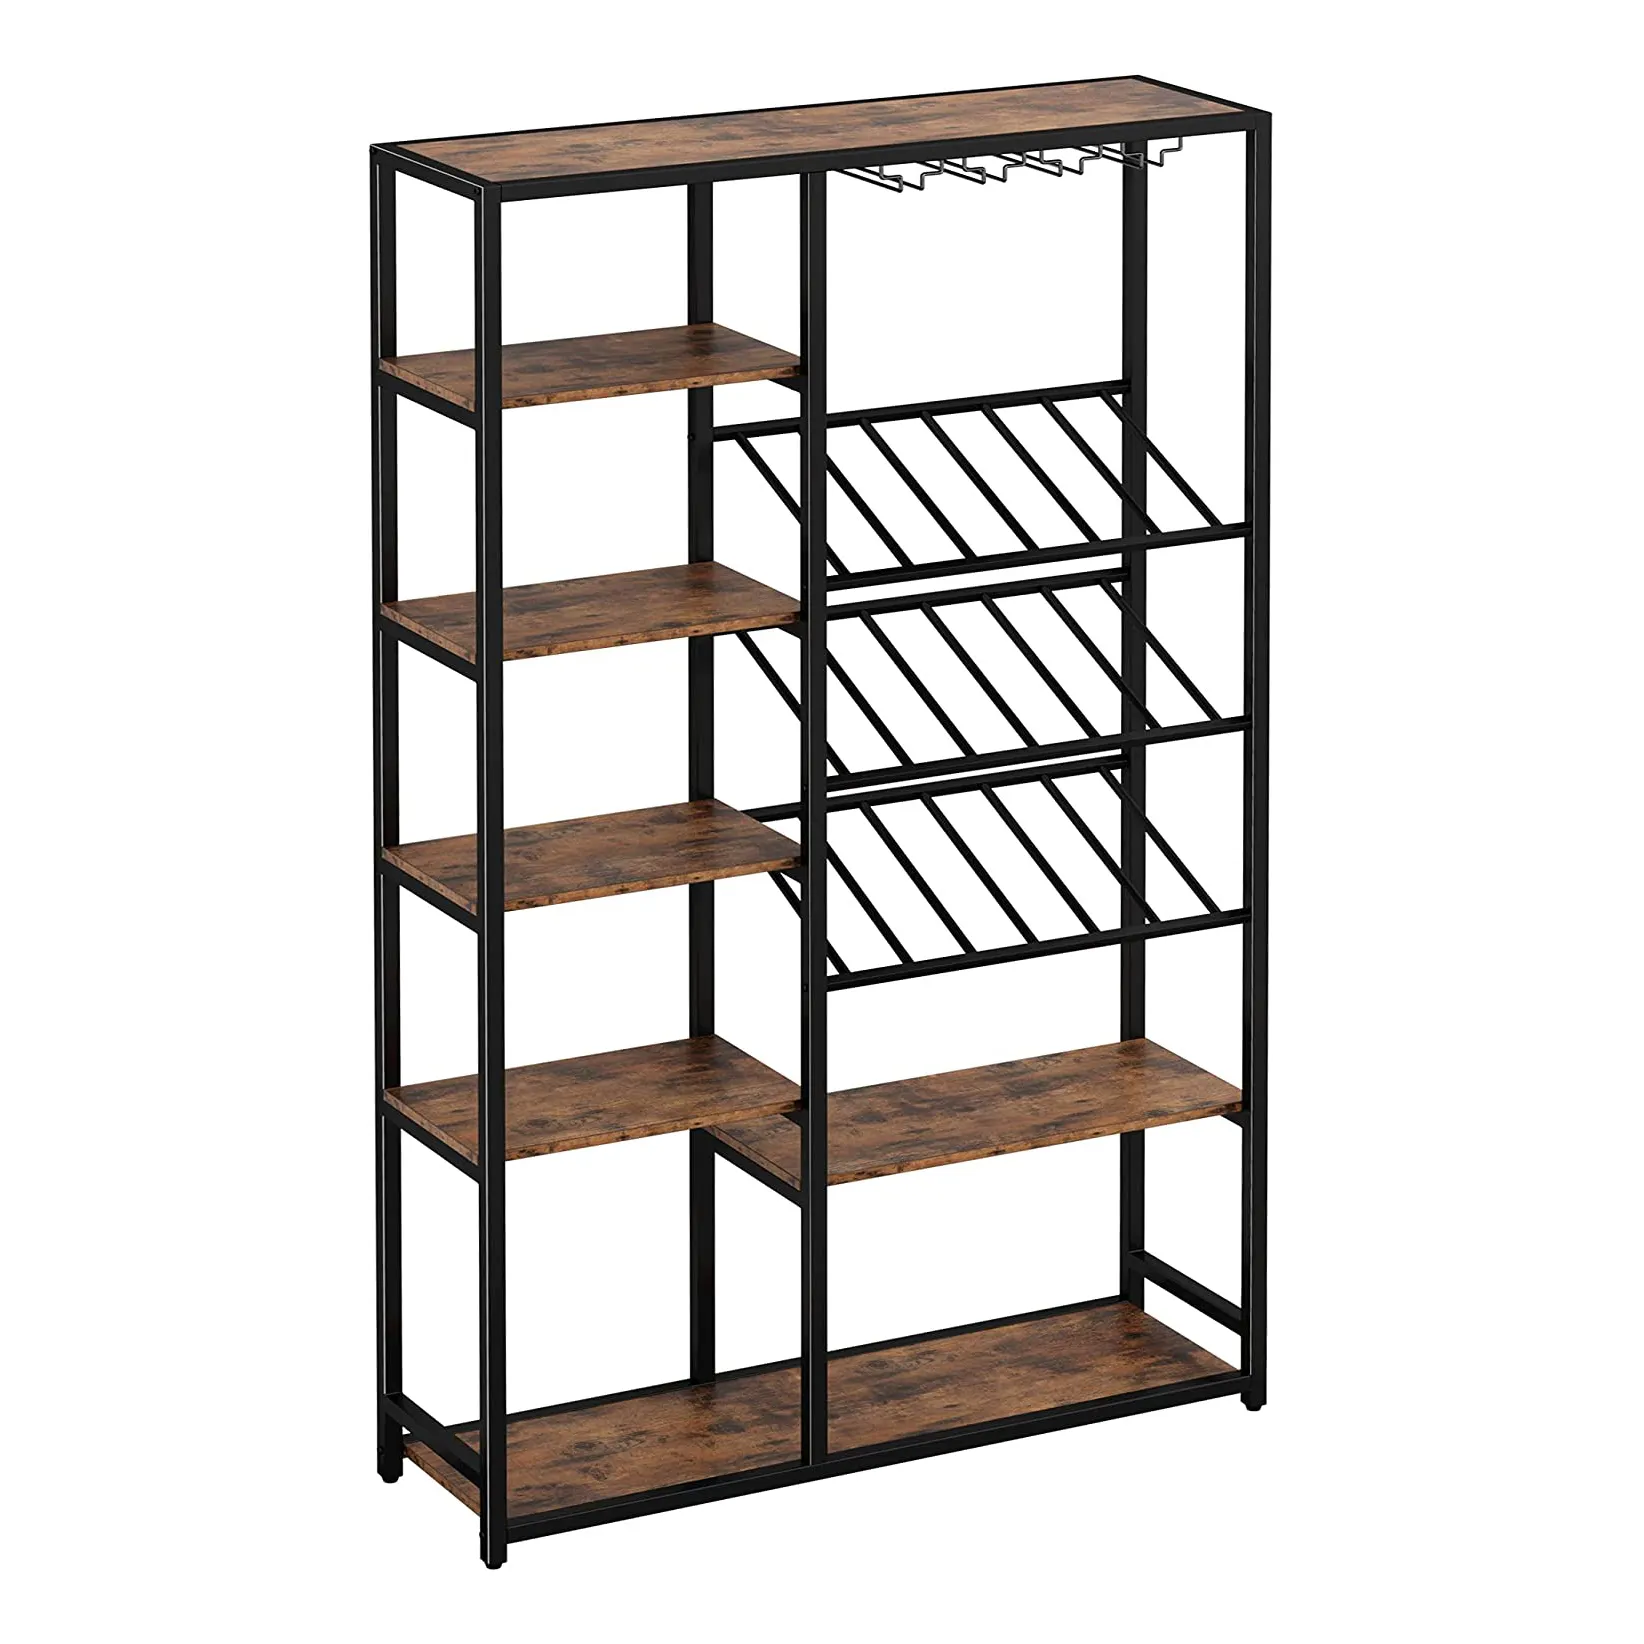 Industrial Freestanding Wine Racks Bookcases and Bookshelves Open Display Shelves Wine Glass Storage for Kitchen Dining Living R